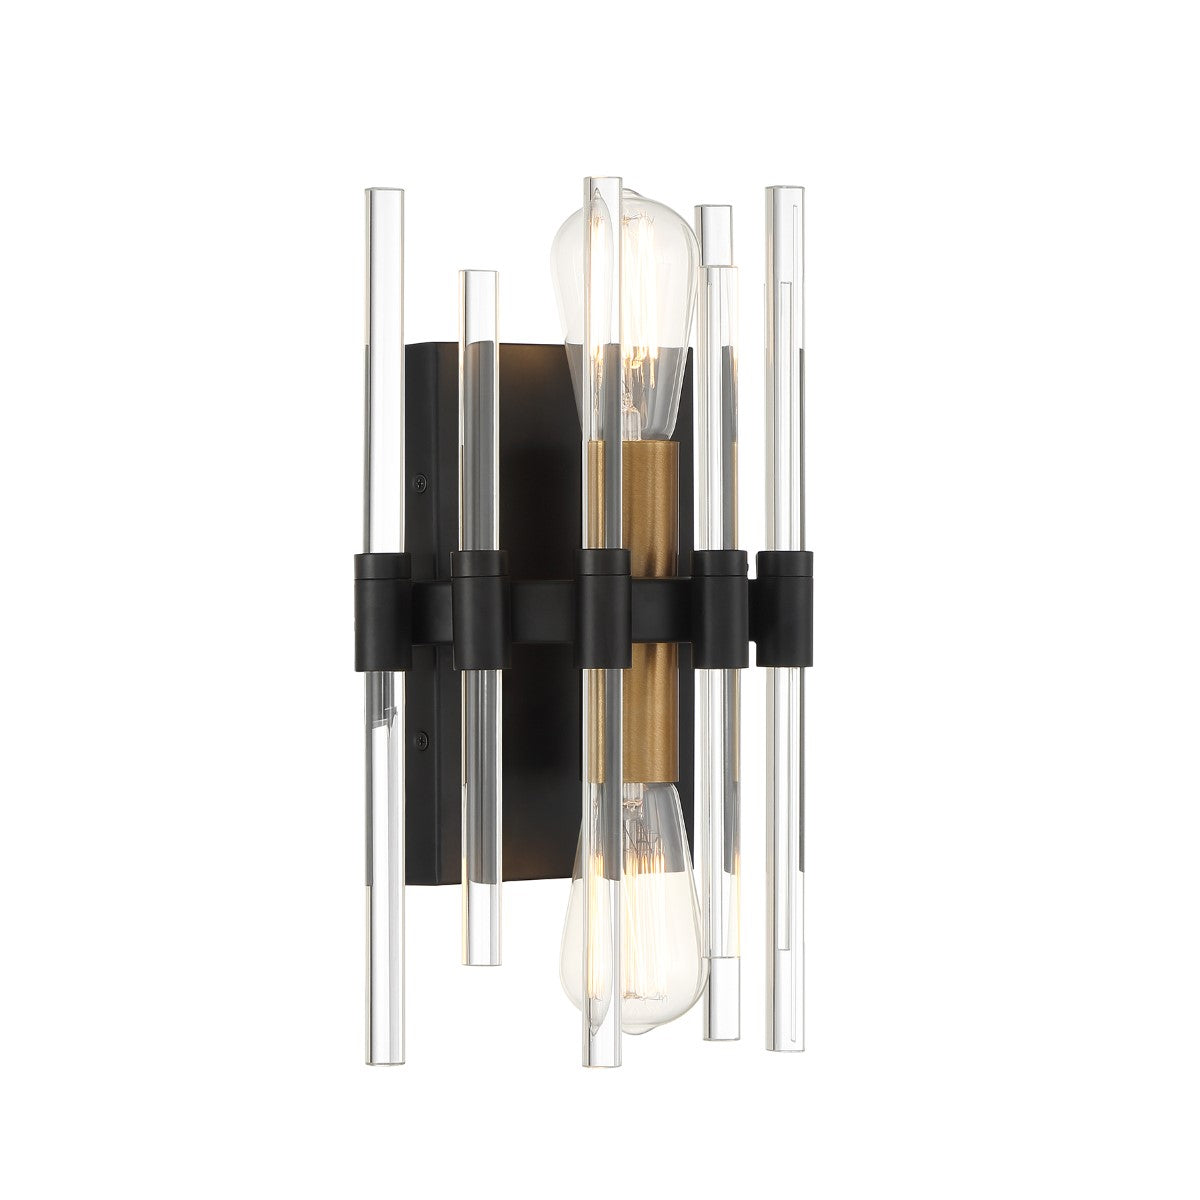 Santiago 13 in. 2 Lights Flush Mount Sconce Matte Black with Warm Brass Accents Finish - Bees Lighting